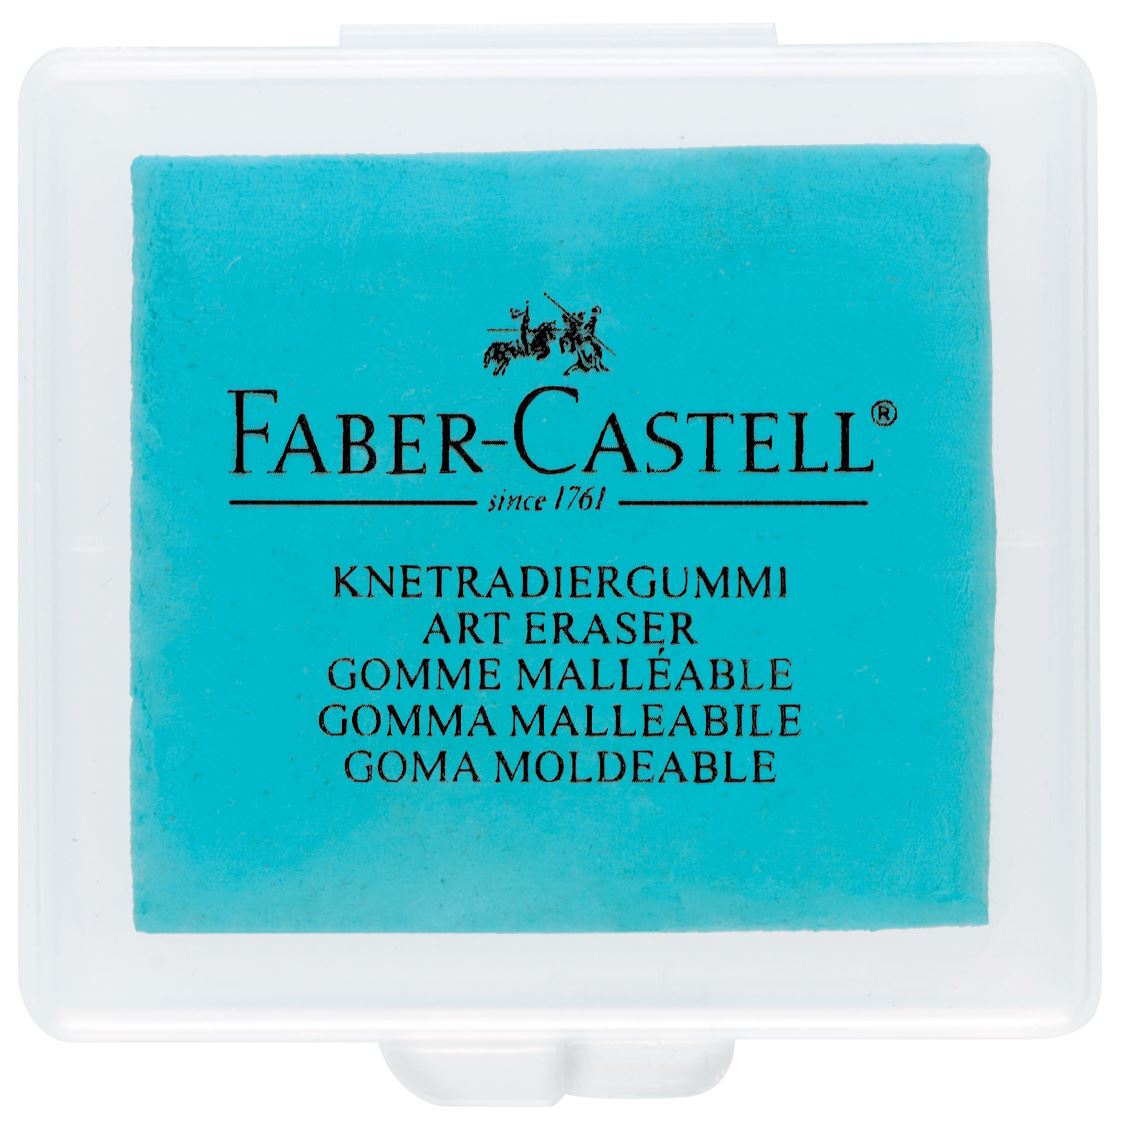 Faber-Castell - Kneadable eraser, turquoise, blackberry, blue